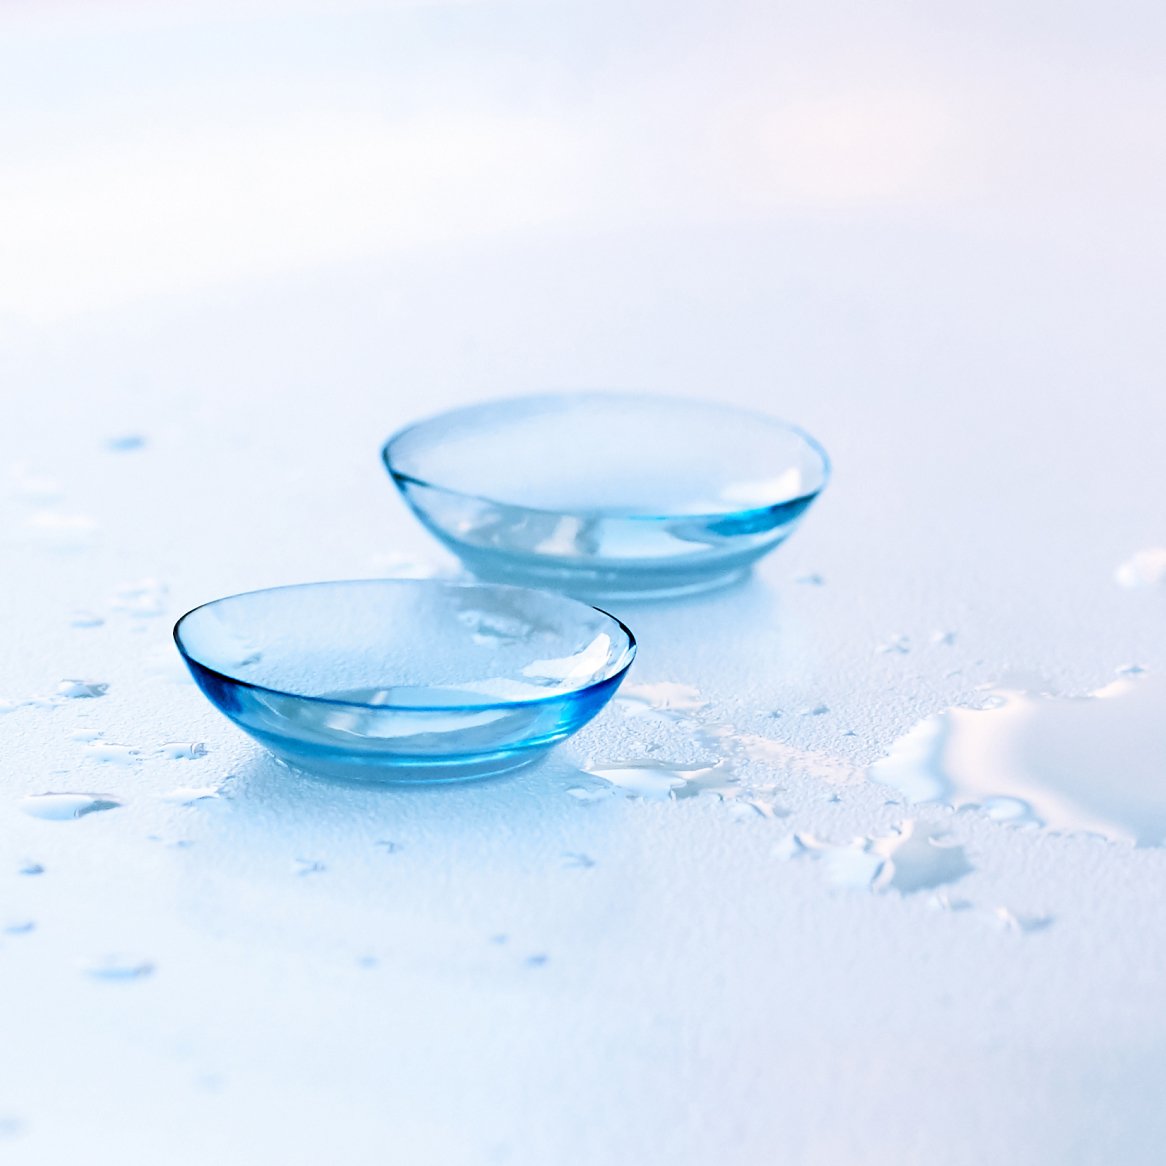 Close-up image of contact lenses that have gotten wet